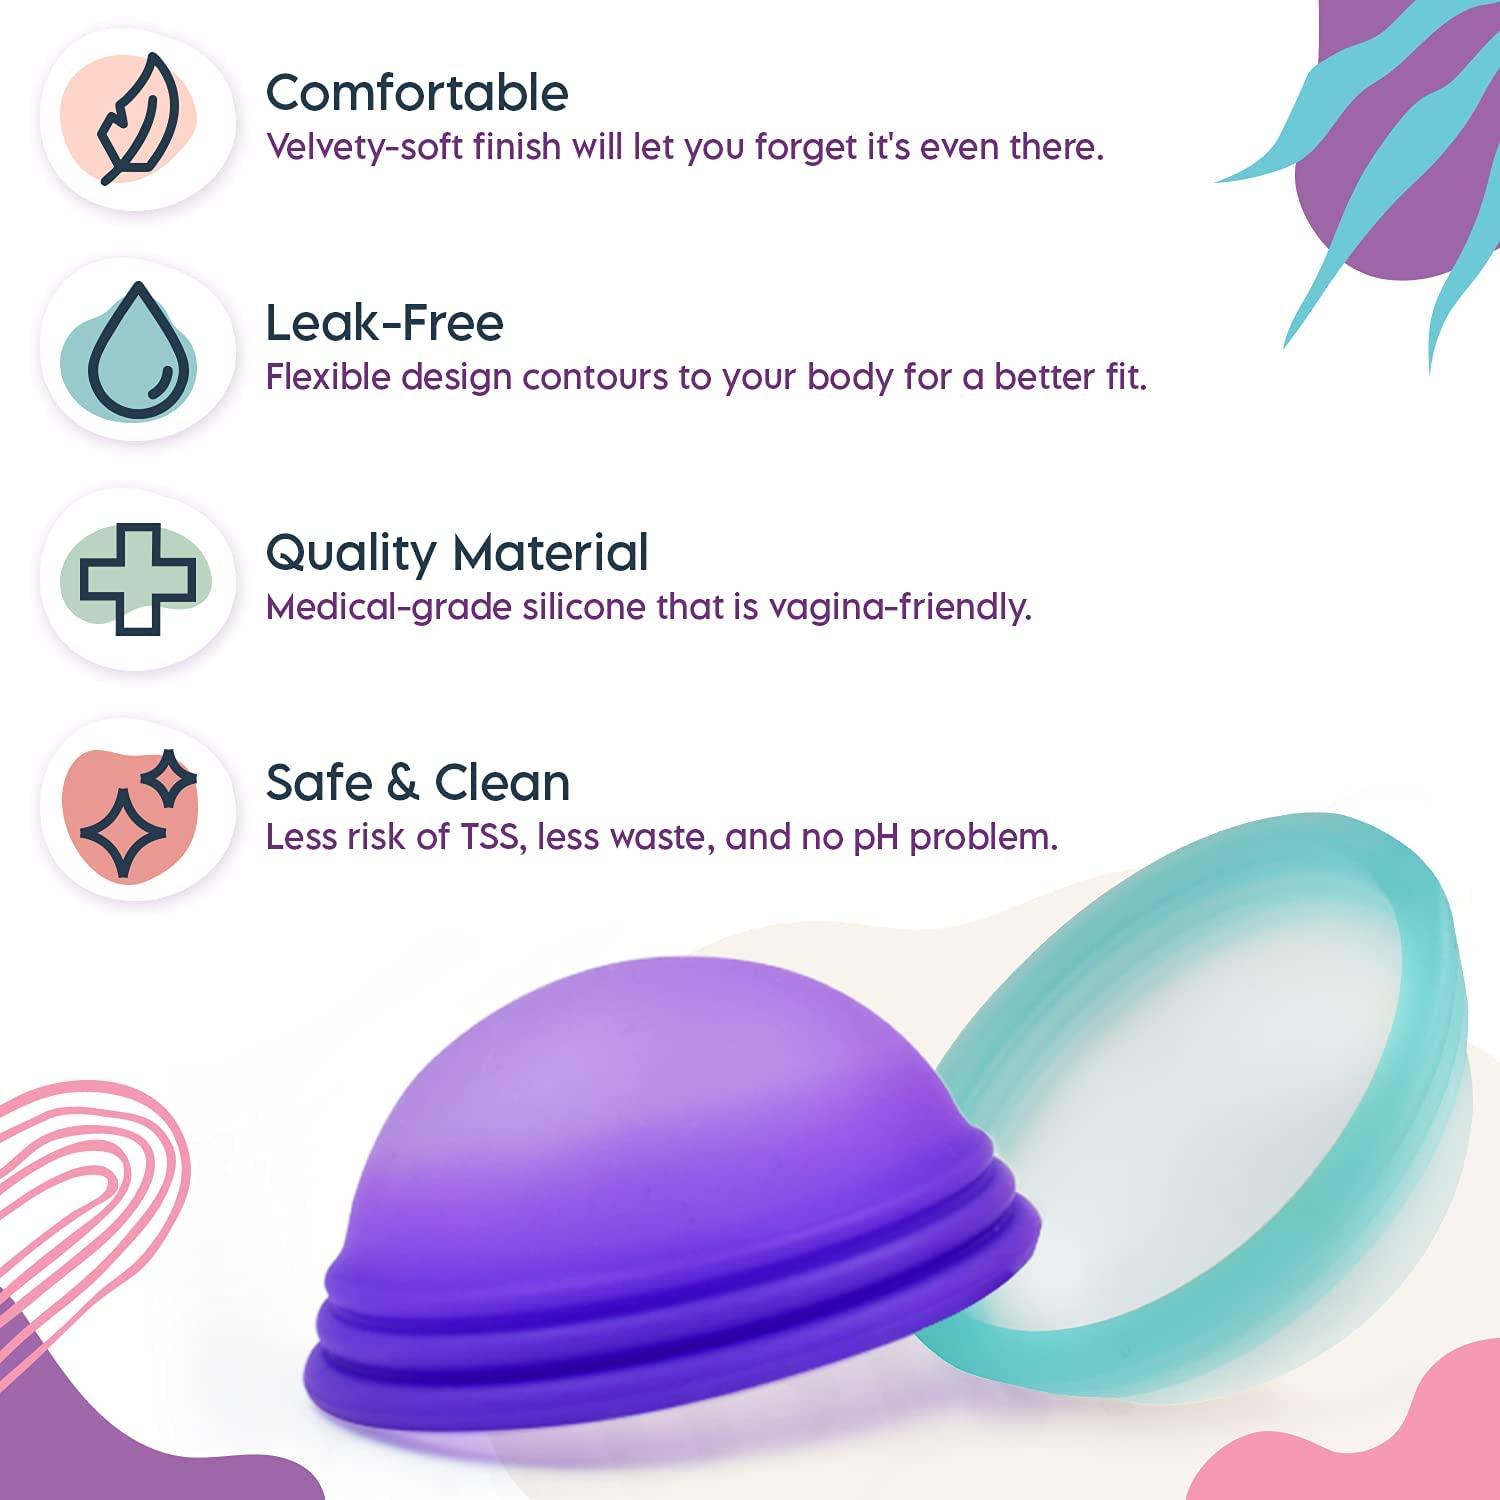 Ecoblossom Reusable Menstrual Disc - Menstrual Cup - Soft Period Disc for  Women Designed with Flexible, Medical-Grade Silicone Period Cup (Black)